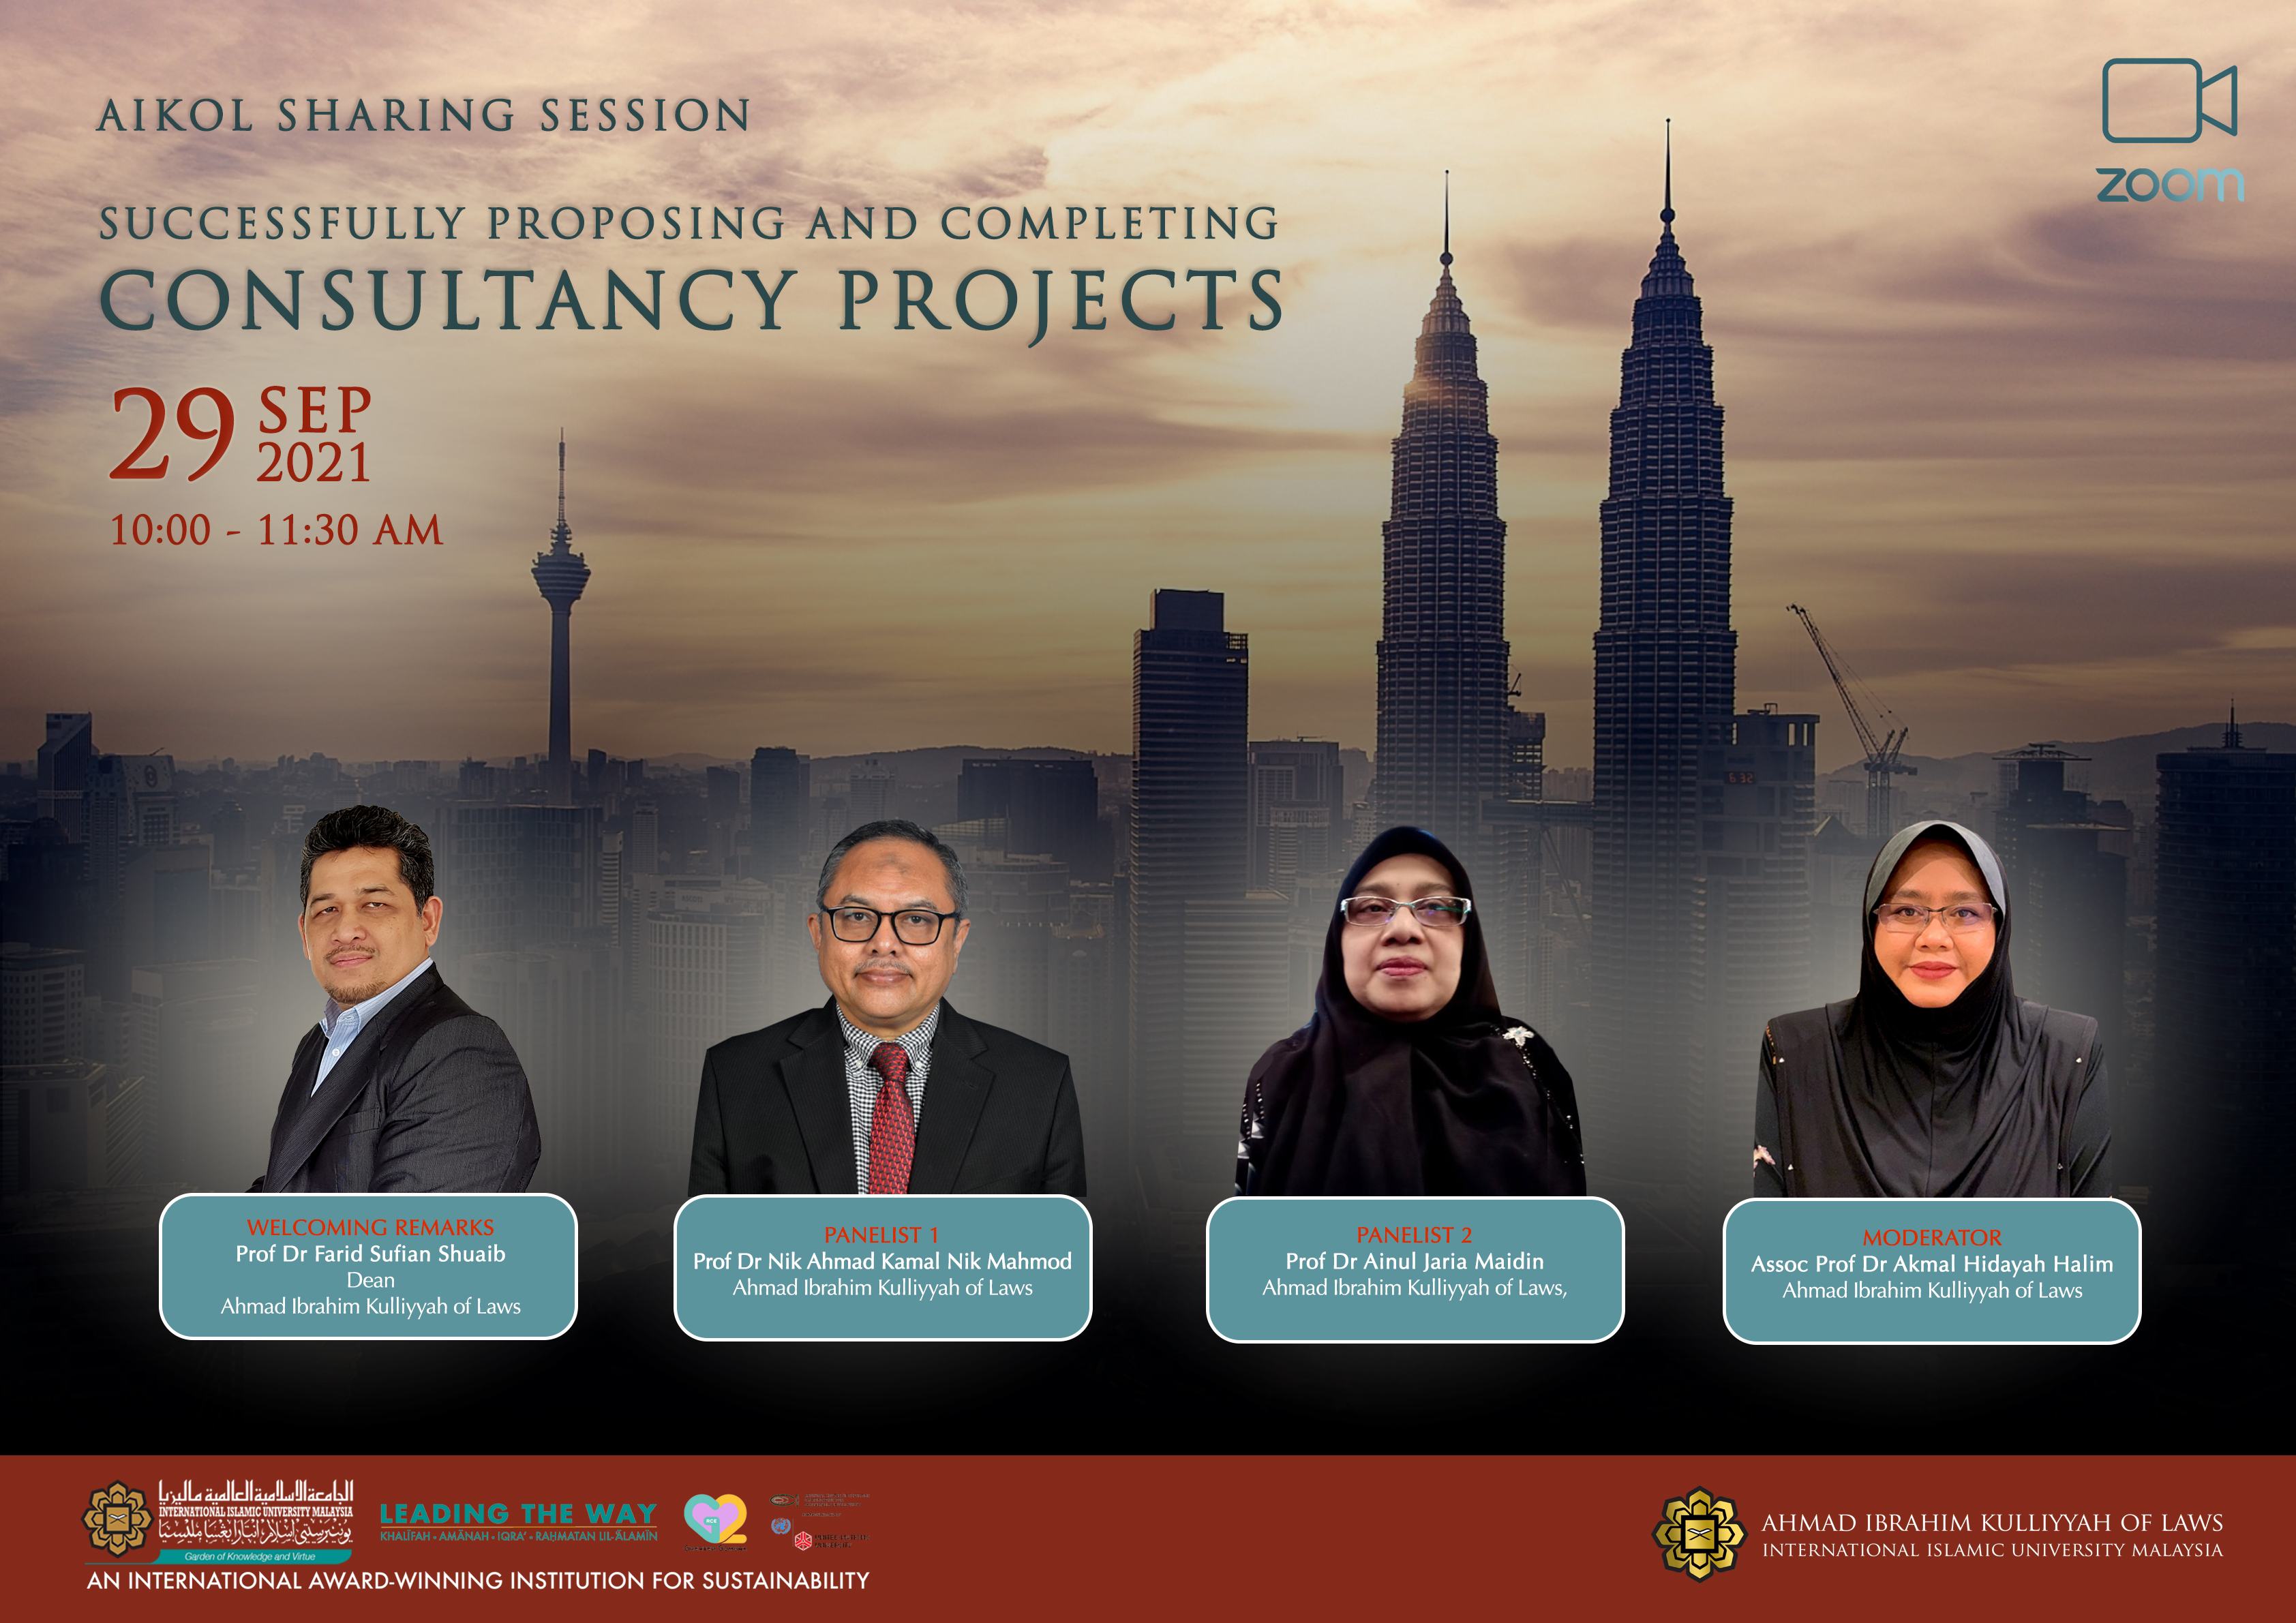 AIKOL SHARING SESSION: SUCCESSFULLY PROPOSING AND COMPLETING CONSULTANCY PROJECTS